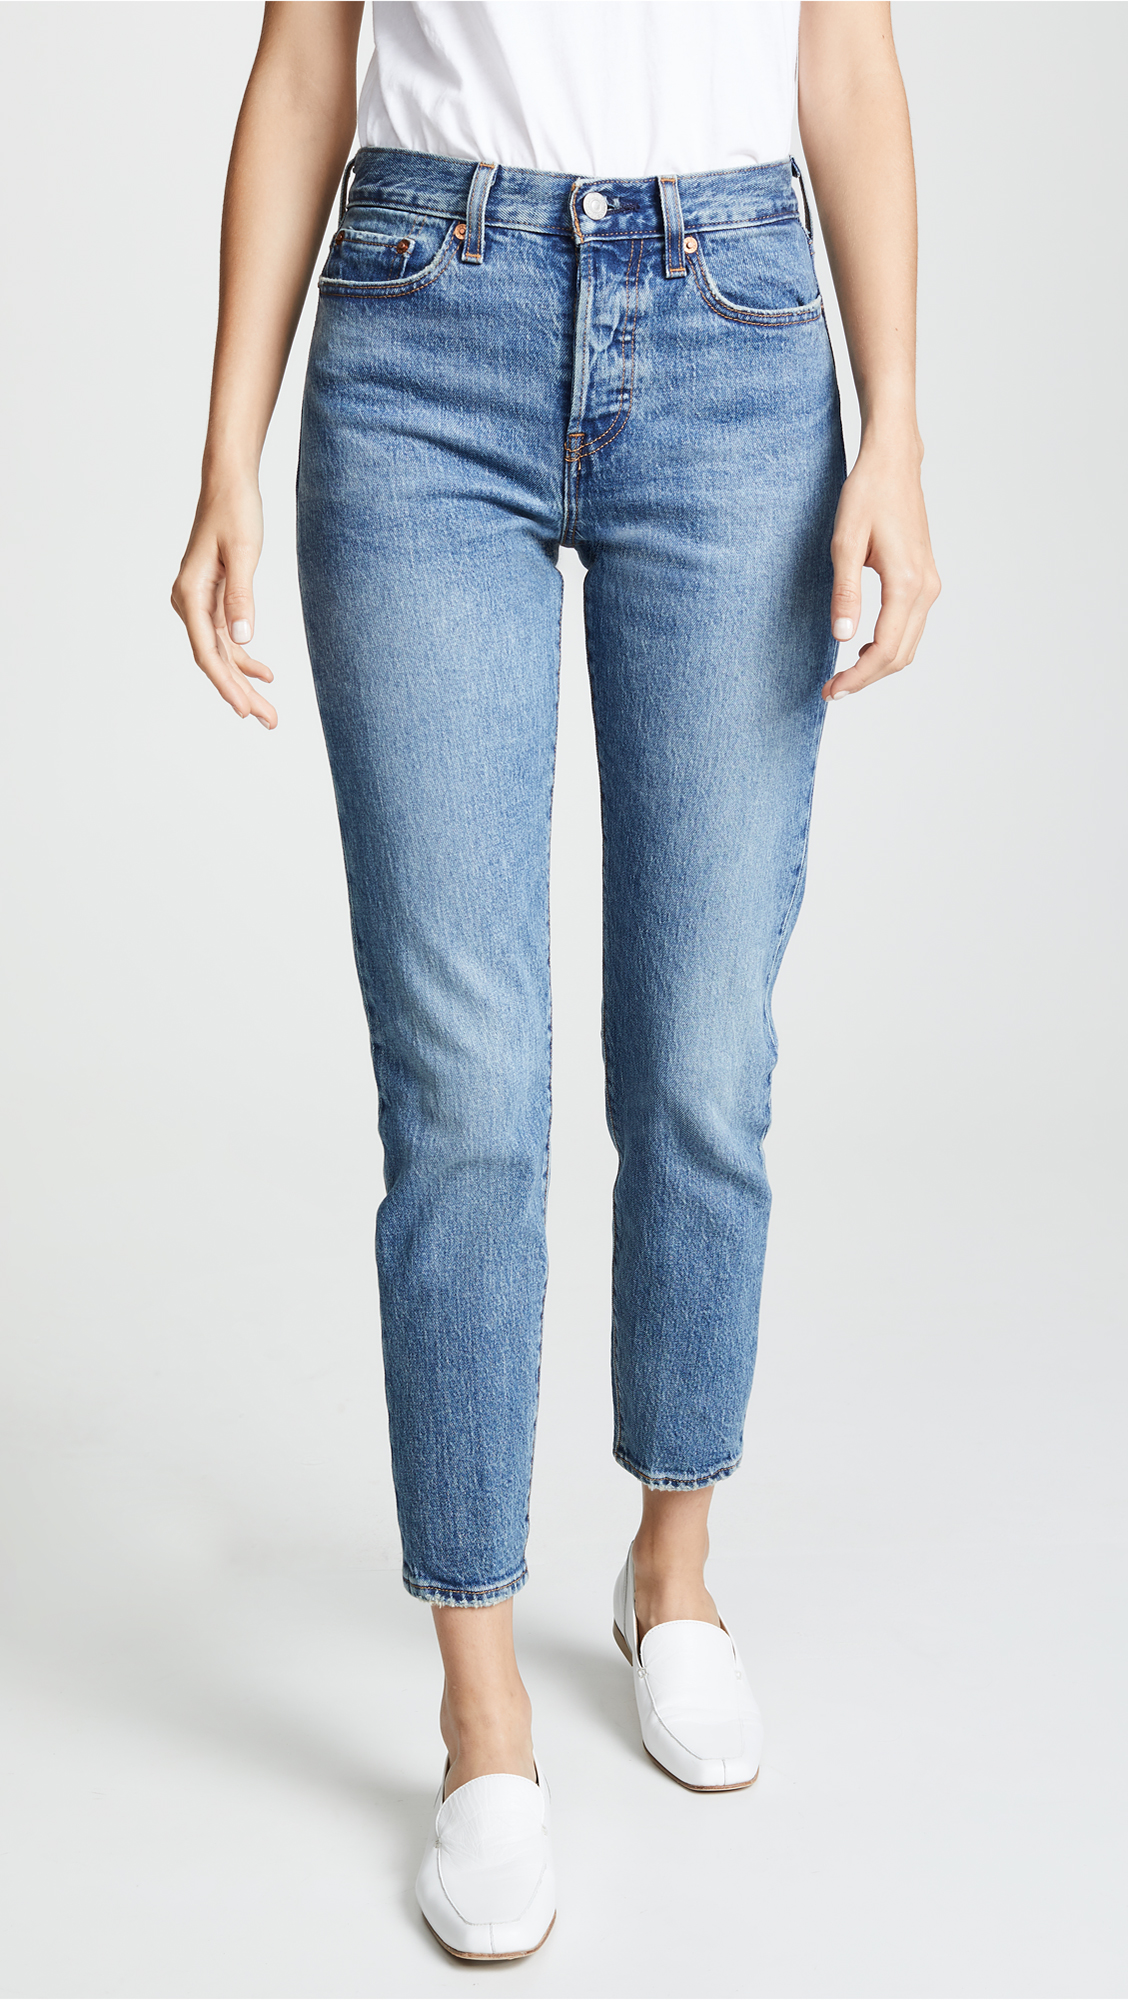 Most Popular Levi's Jeans for Women 